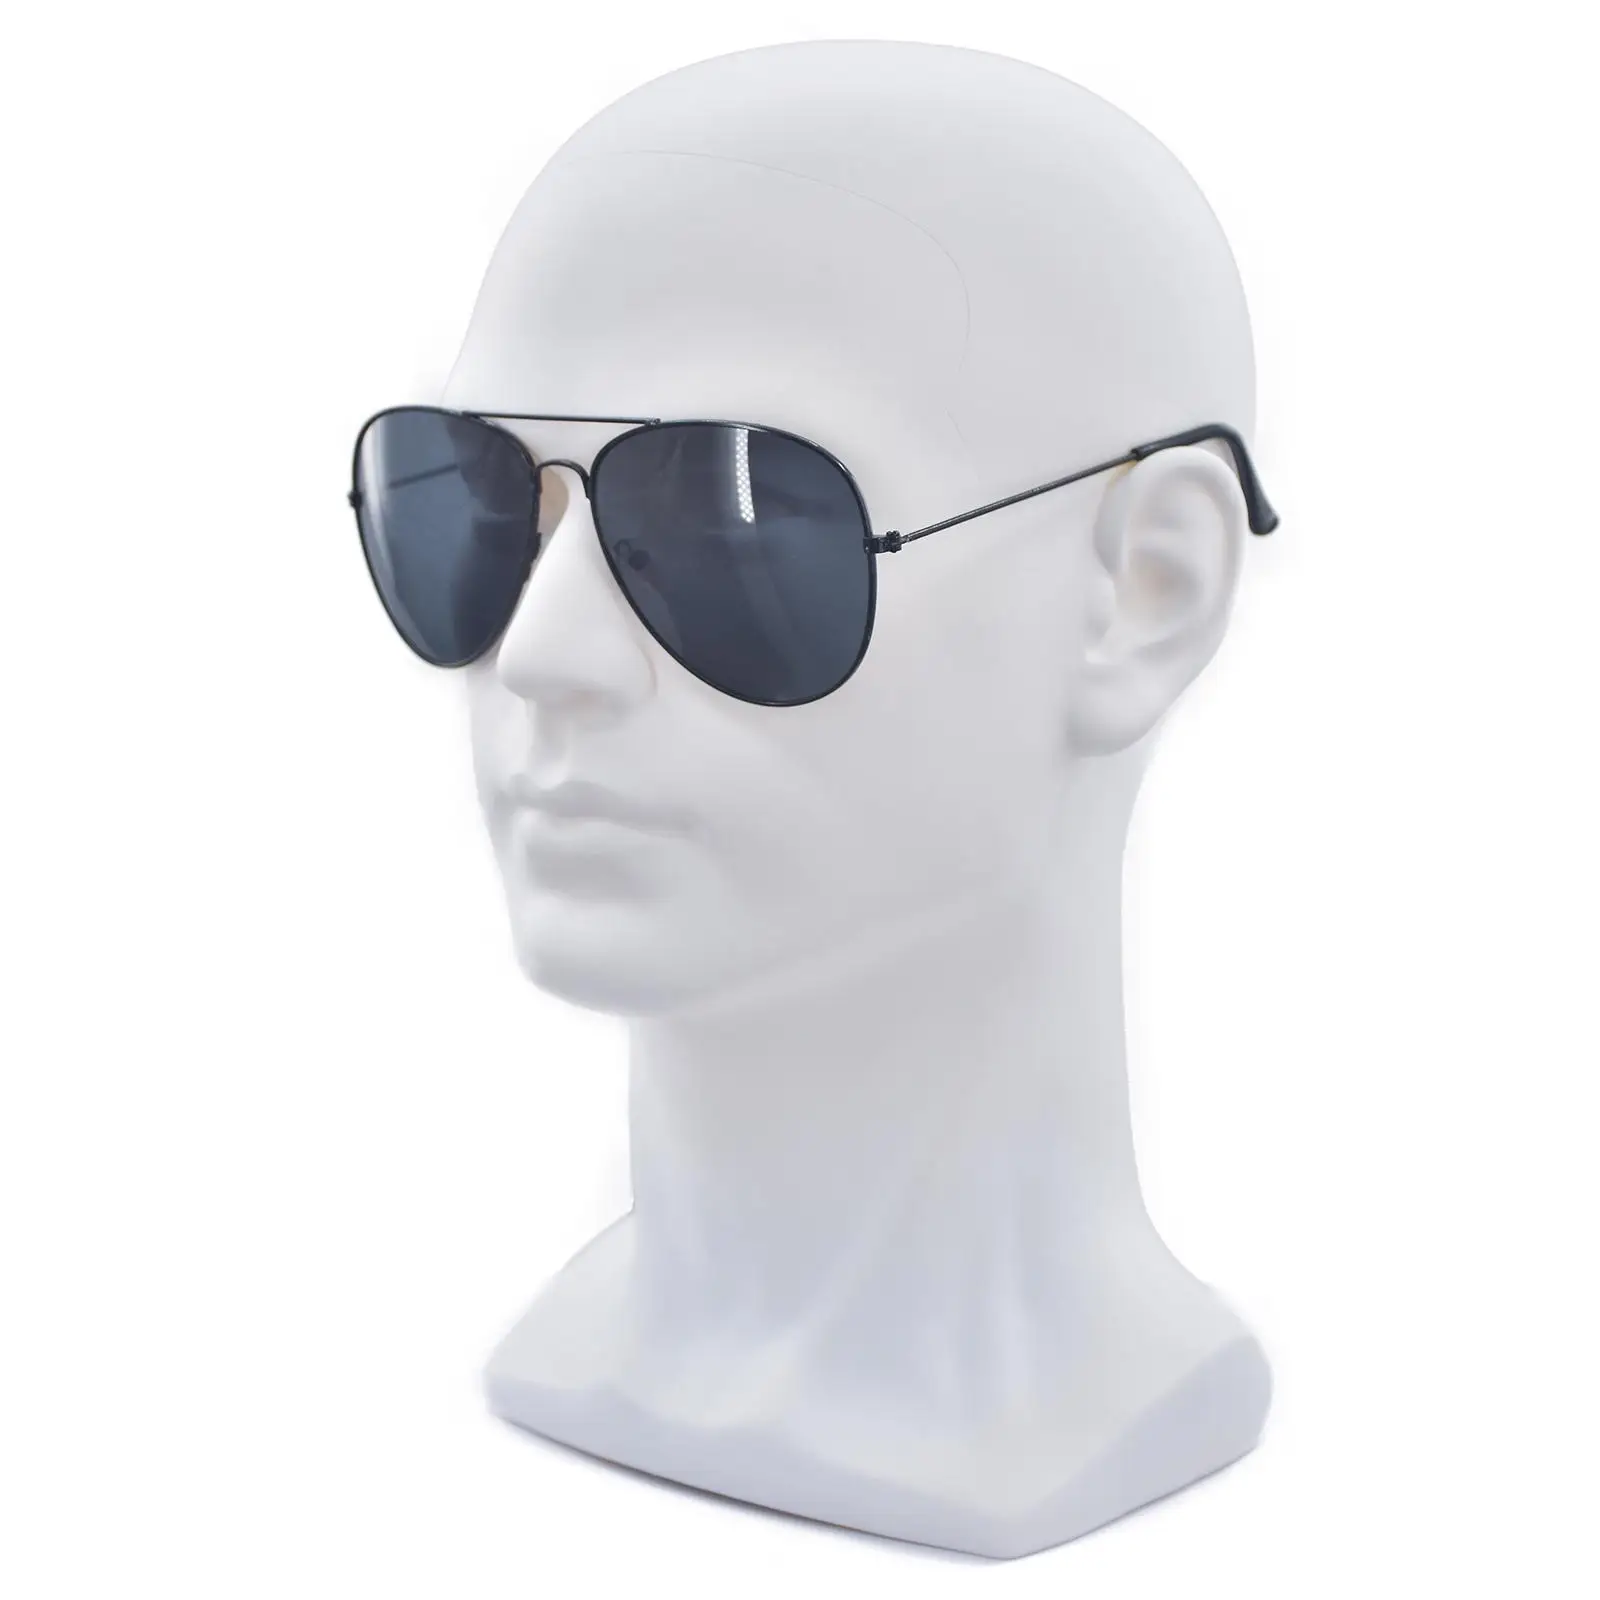 Professional Male Mannequin Head Hat Holder Stand Stable for Headset Salon Earrings